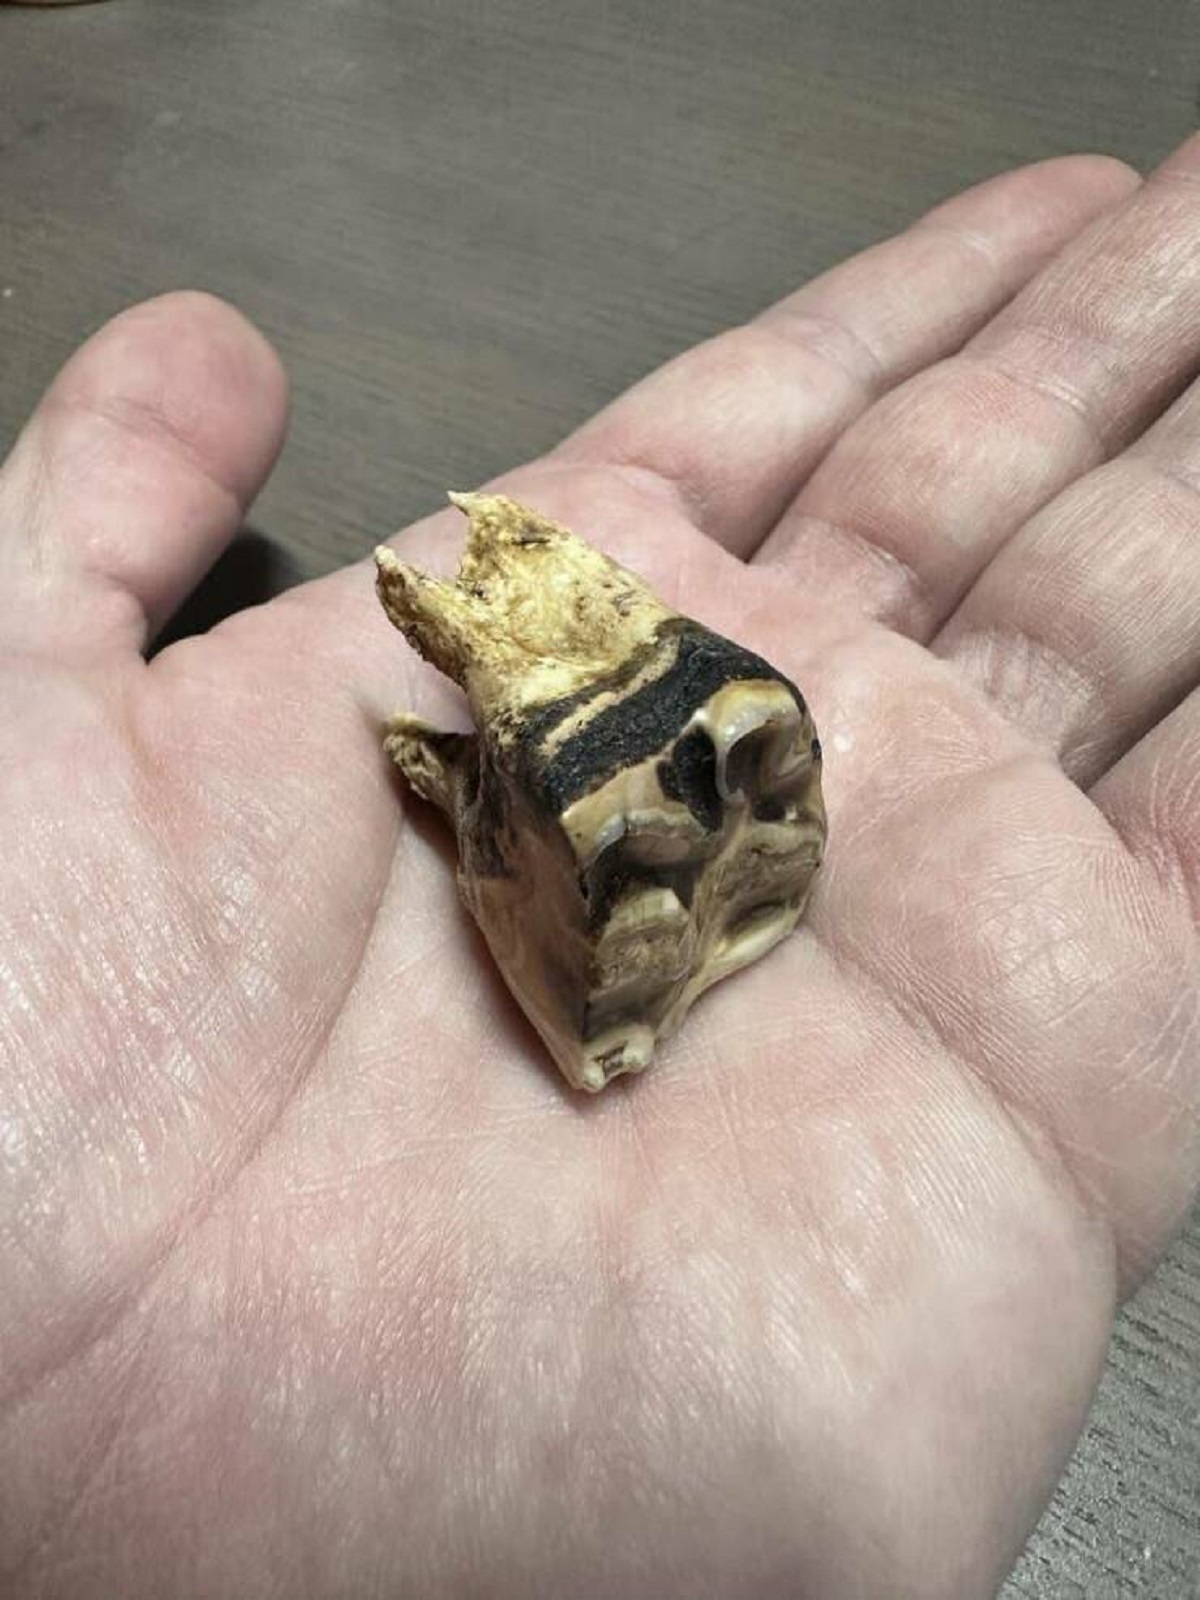 This is what a 30-year-old horse's tooth looks like: